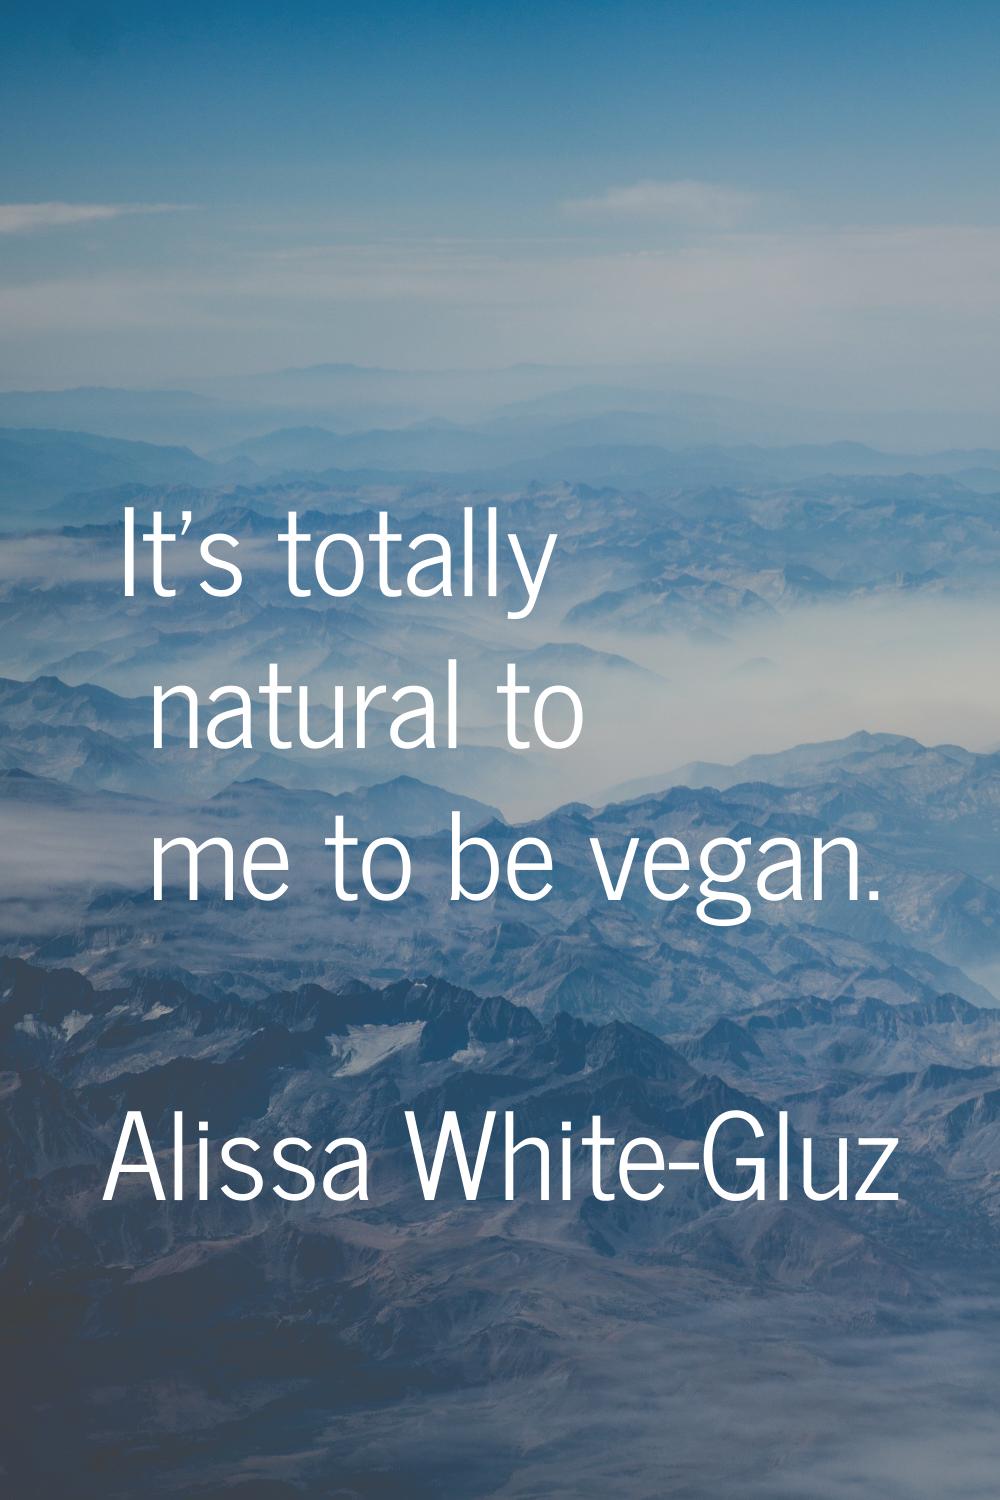 It's totally natural to me to be vegan.